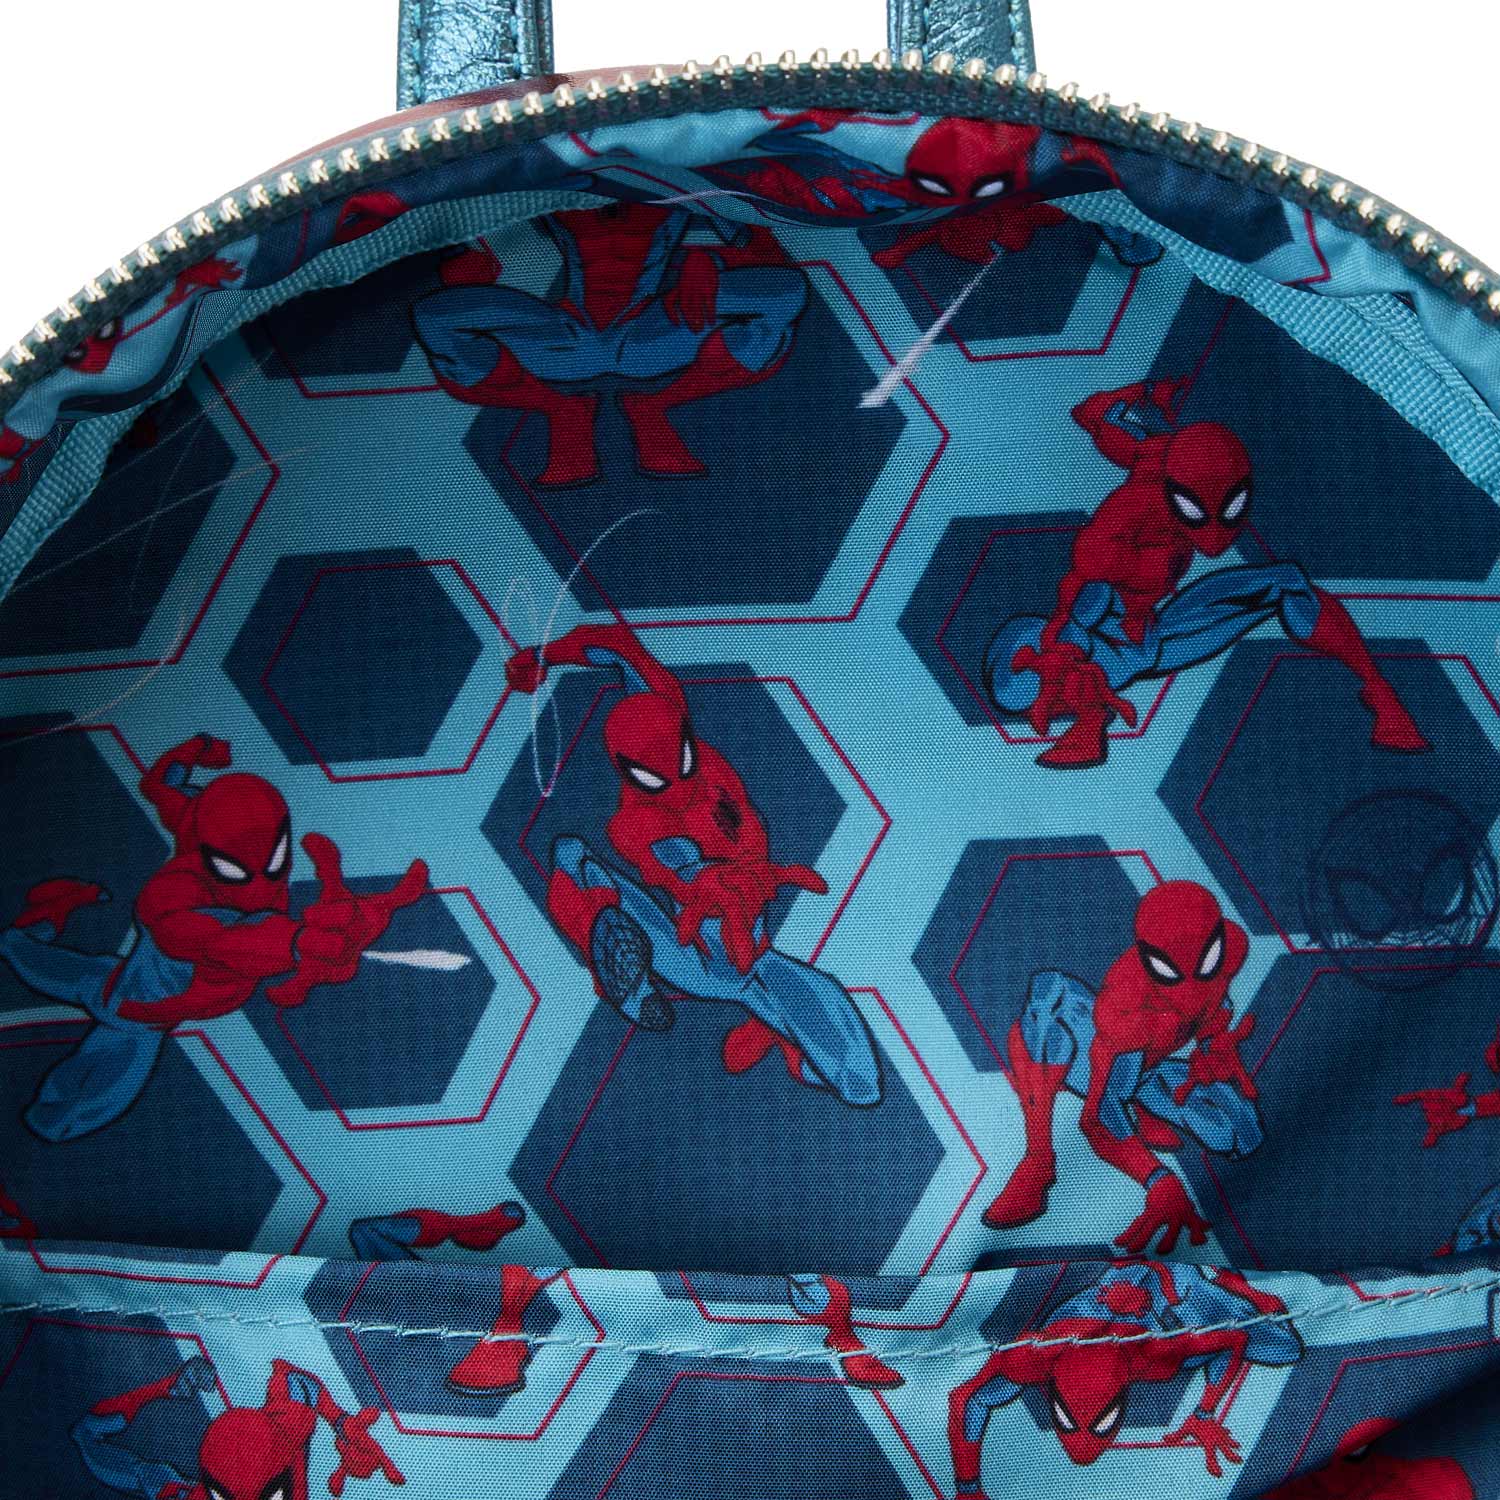 Loungefly x Marvel Spider-Man Shine Cosplay Mini Backpack